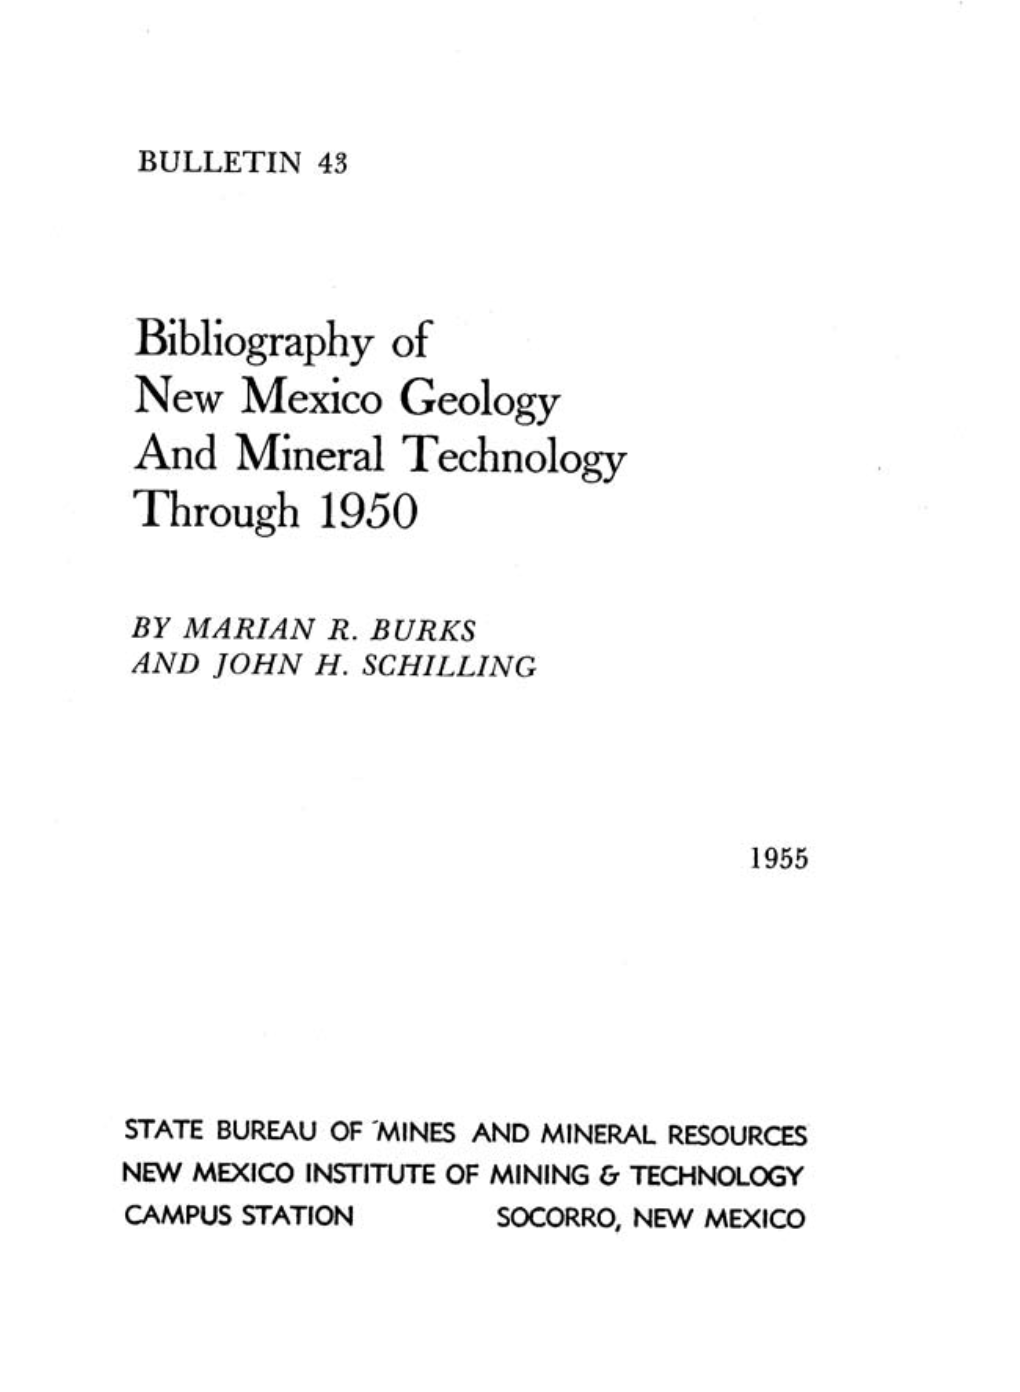 Water, in Bibliography of New Mexico Geology and Mineral Technology